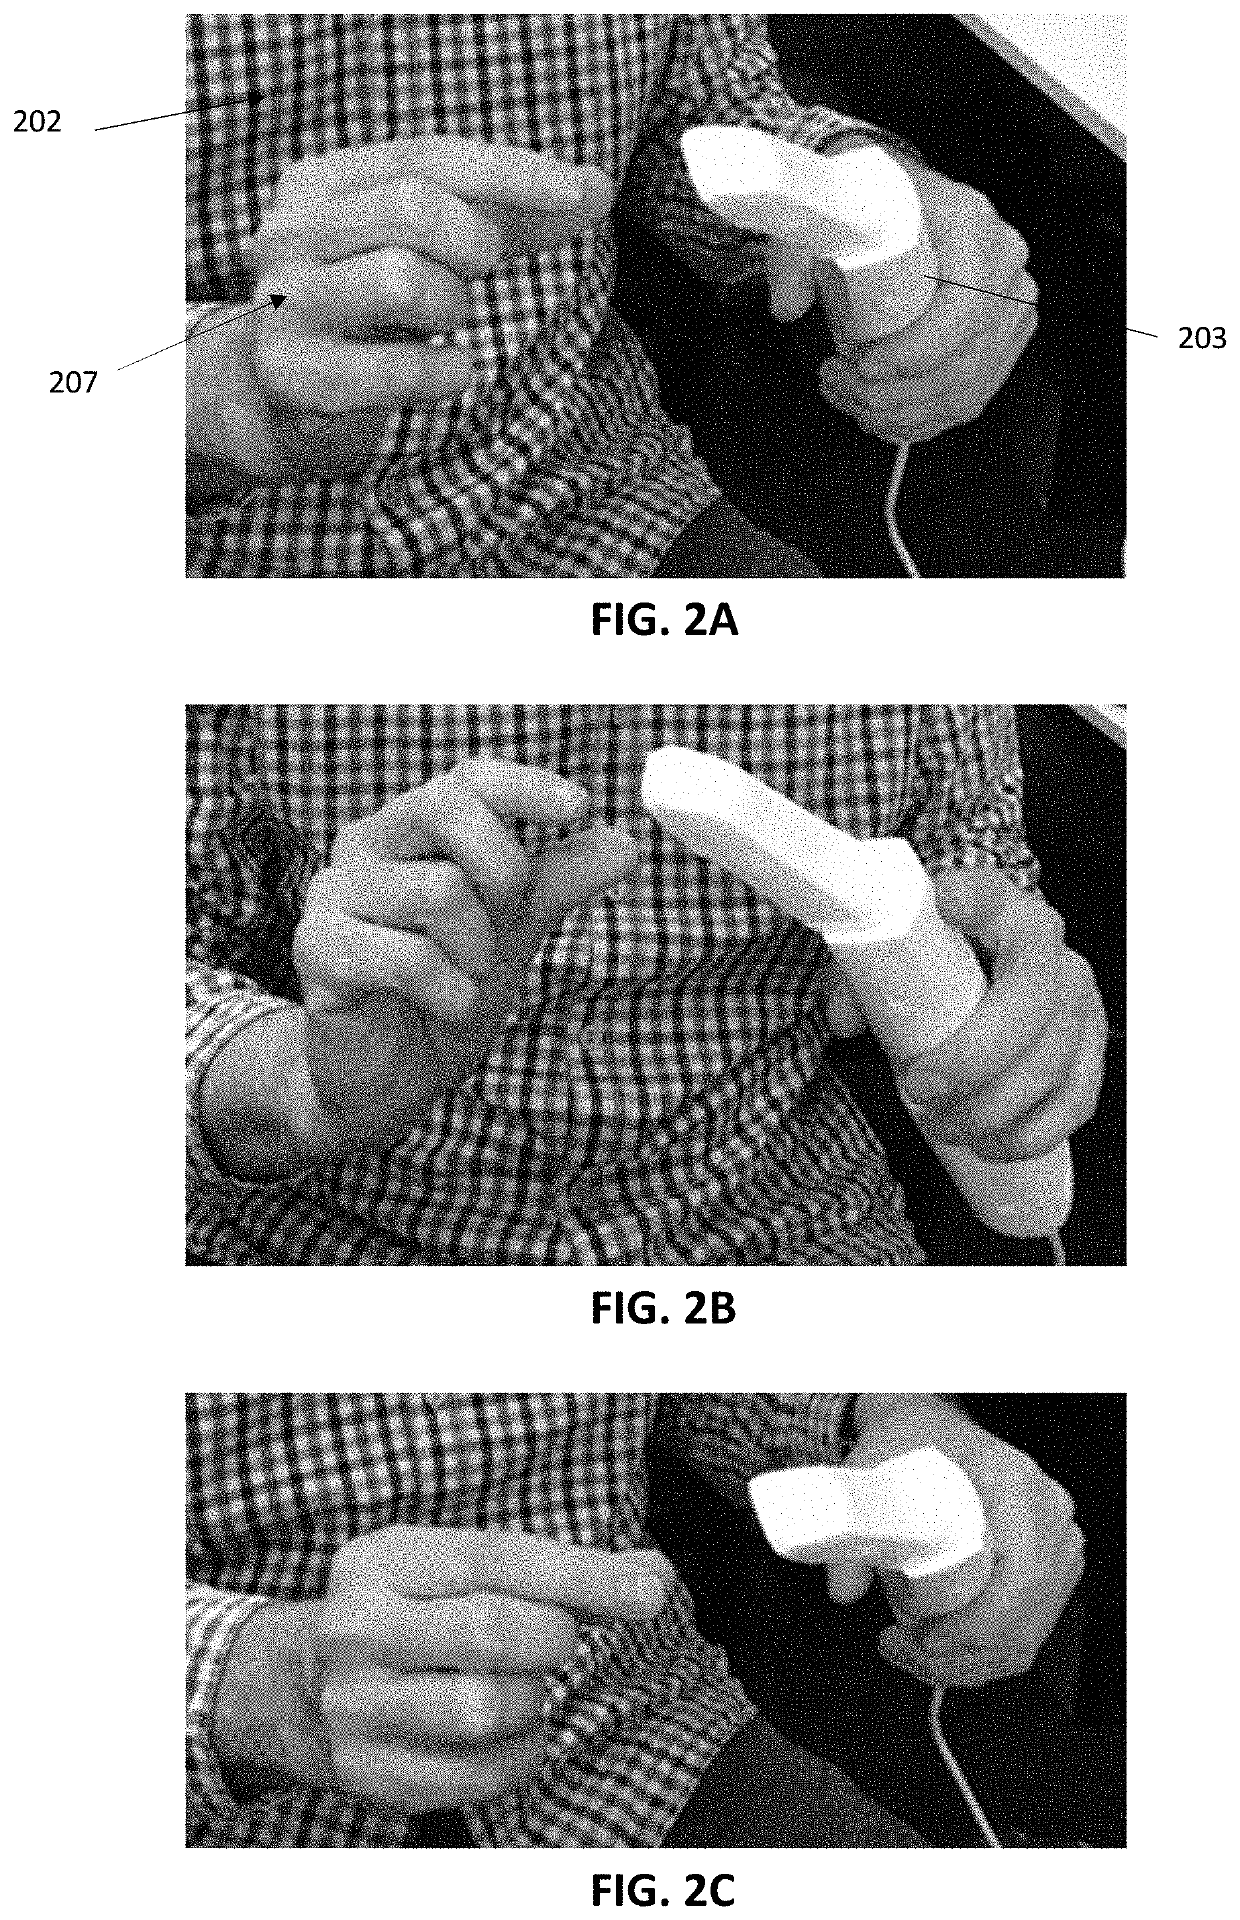 Gesture control using an intraoral scanner